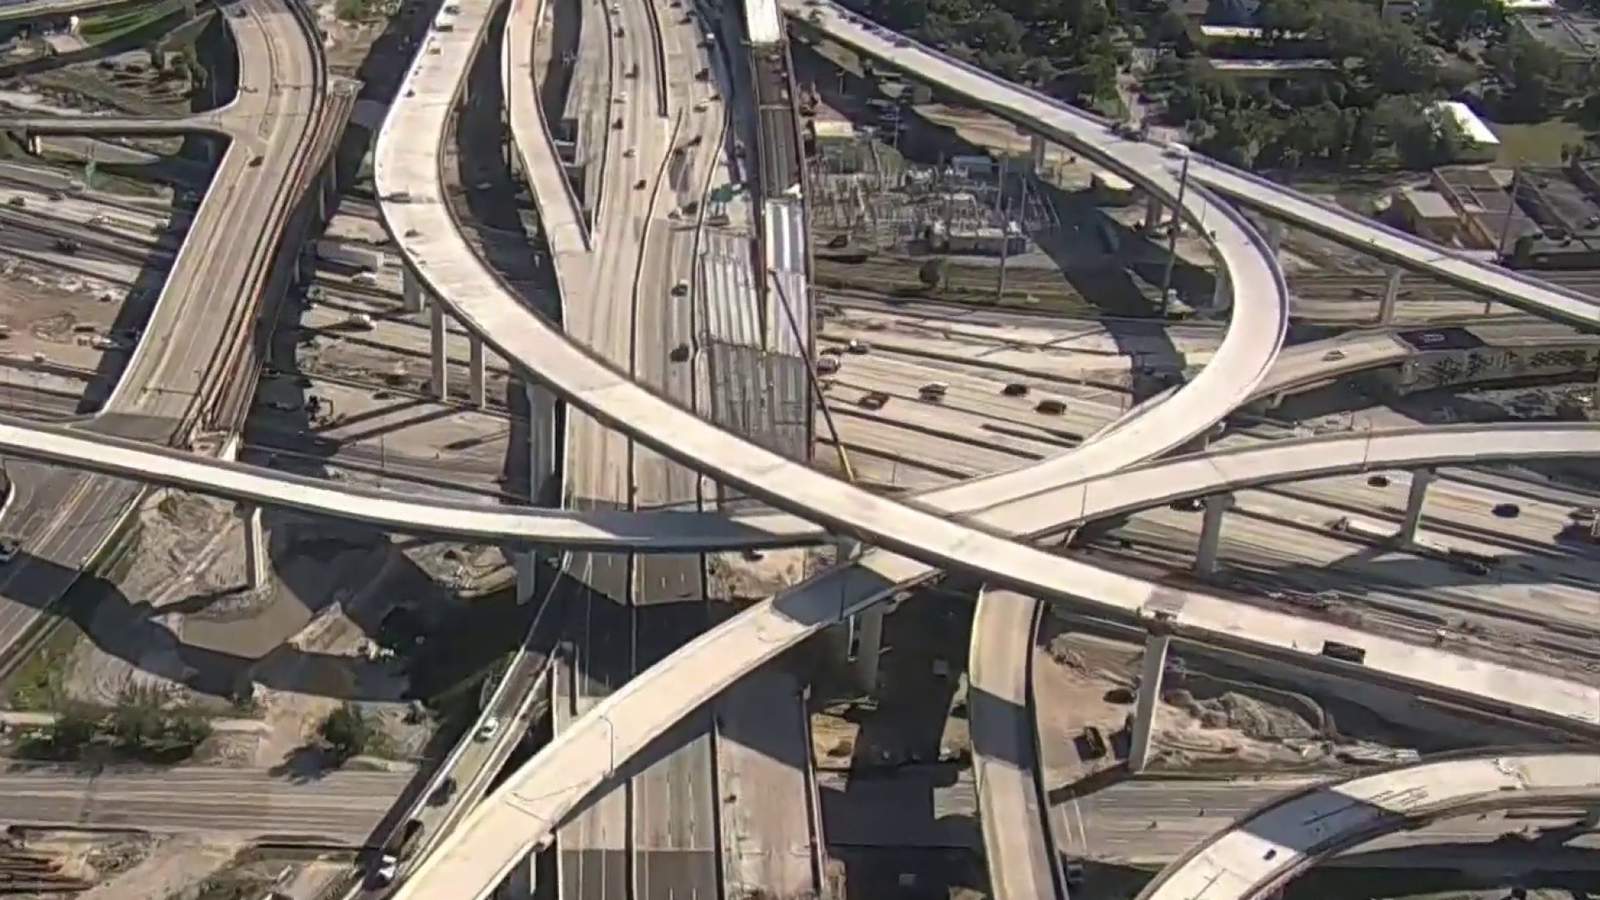 As another year of I-4 construction begins, relief is coming